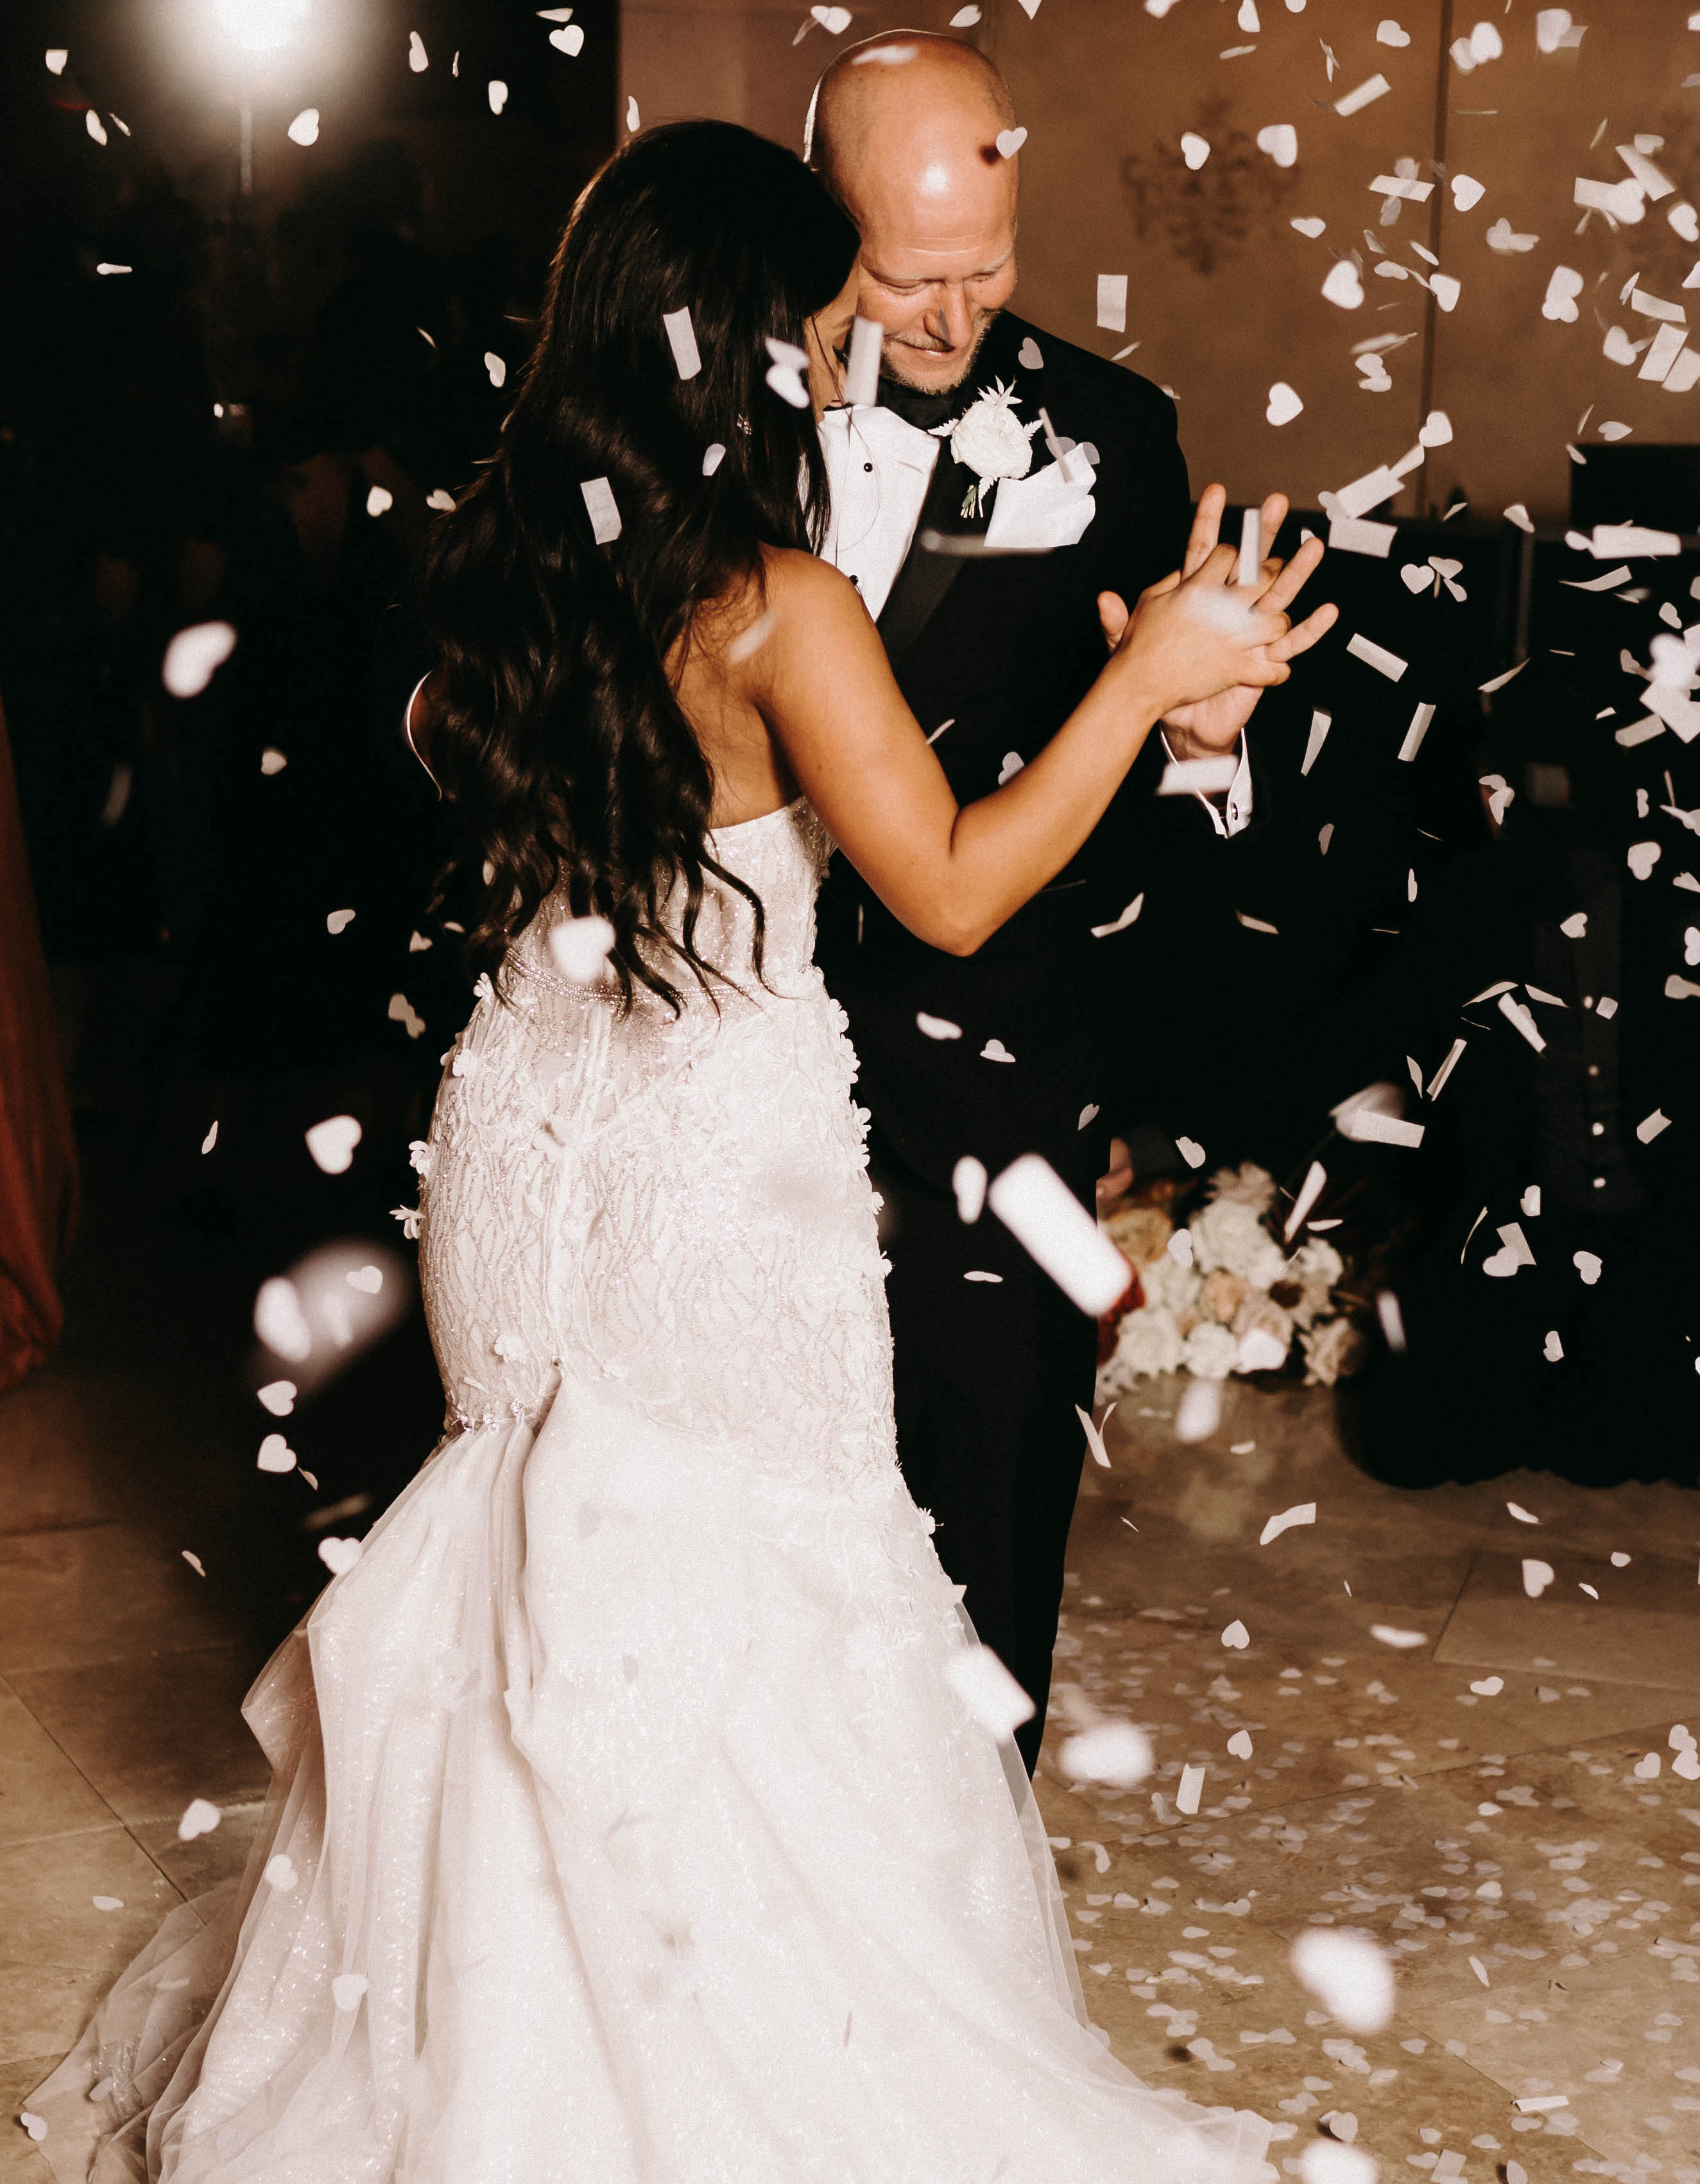 A bride and groom dance at their earth-toned wedding with white confetti falling around them.